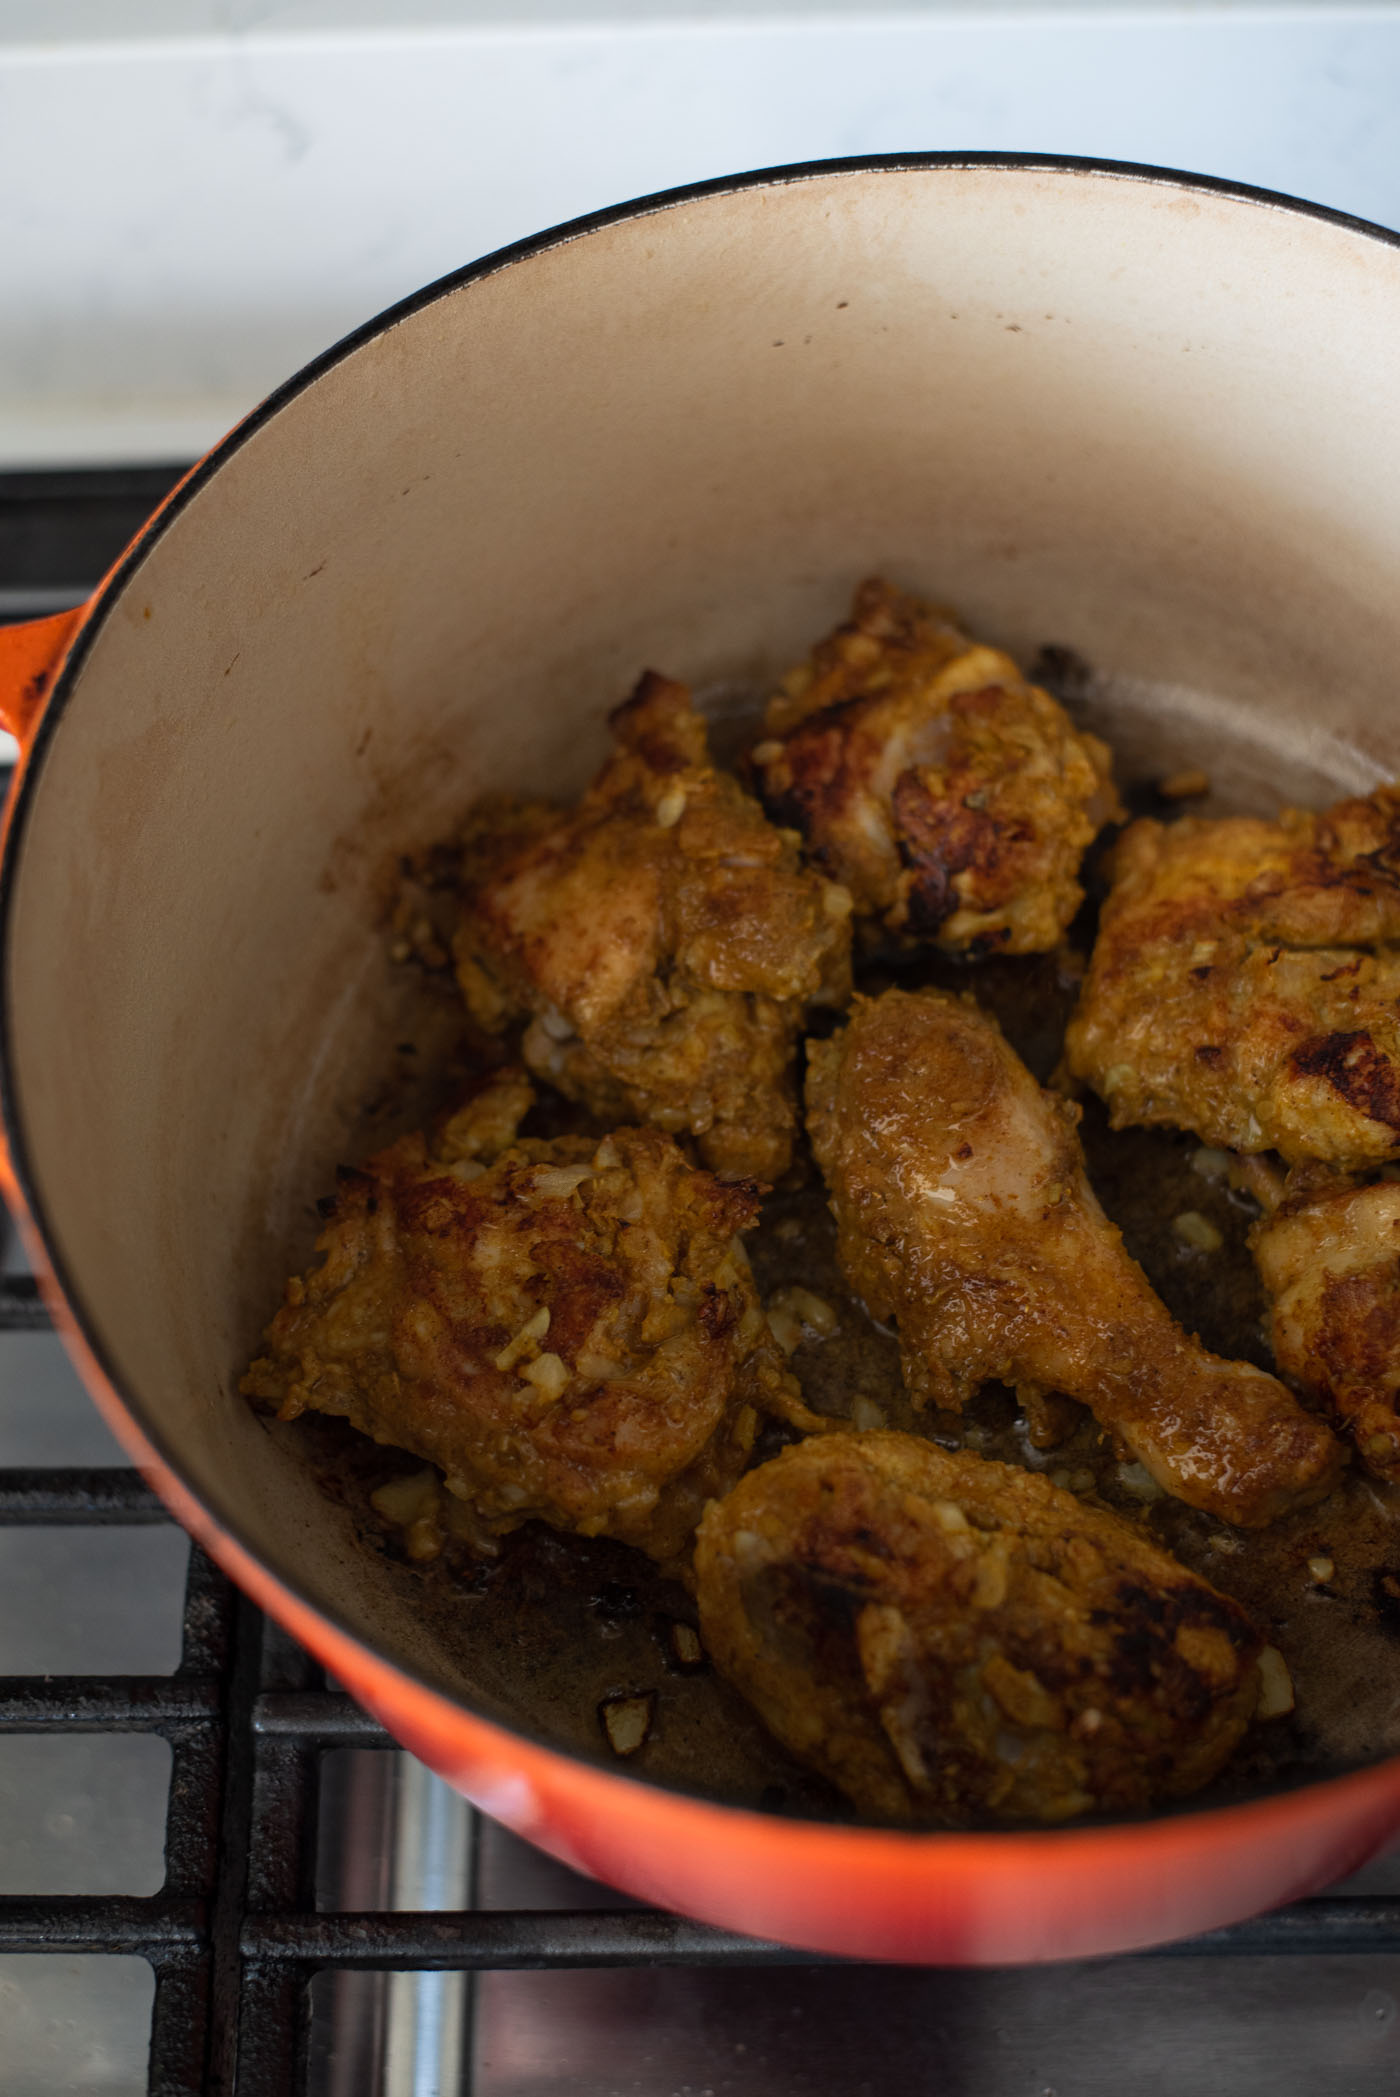 Marinated chicken parts are seared in a pot until browned on the surface